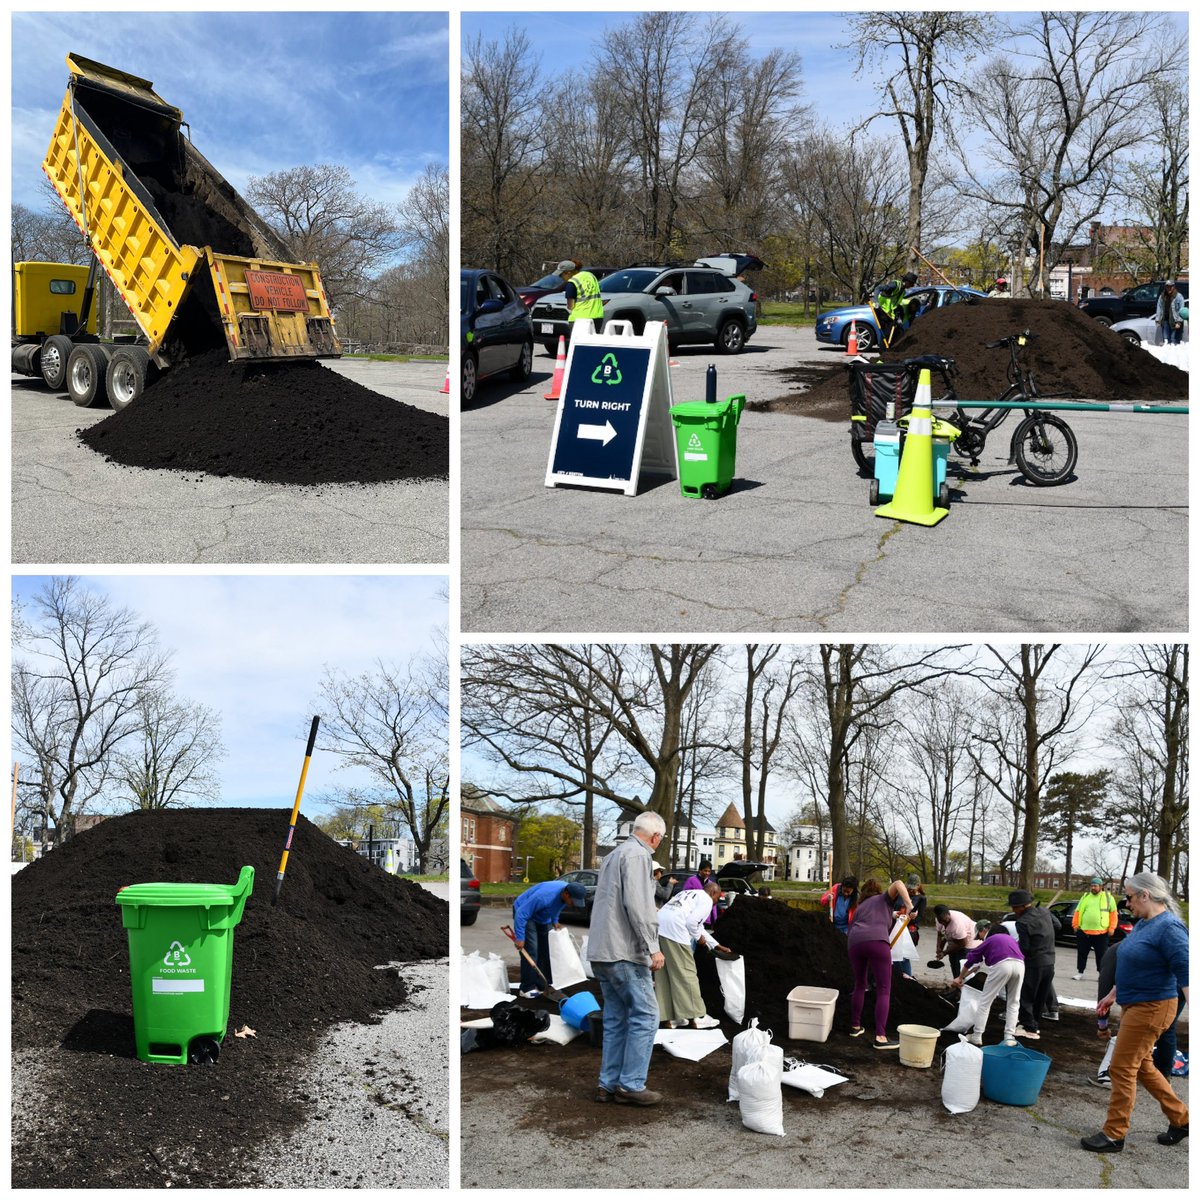 In partnership with @savethatstuff & @GarbagetoGarden, PWD’s Zero Waste team hosted a free #compost giveaway over the weekend at Franklin Park in #Dorchester. Special thanks to all the @CityOfBoston residents who joined us to collect nutrient rich compost for their gardens.